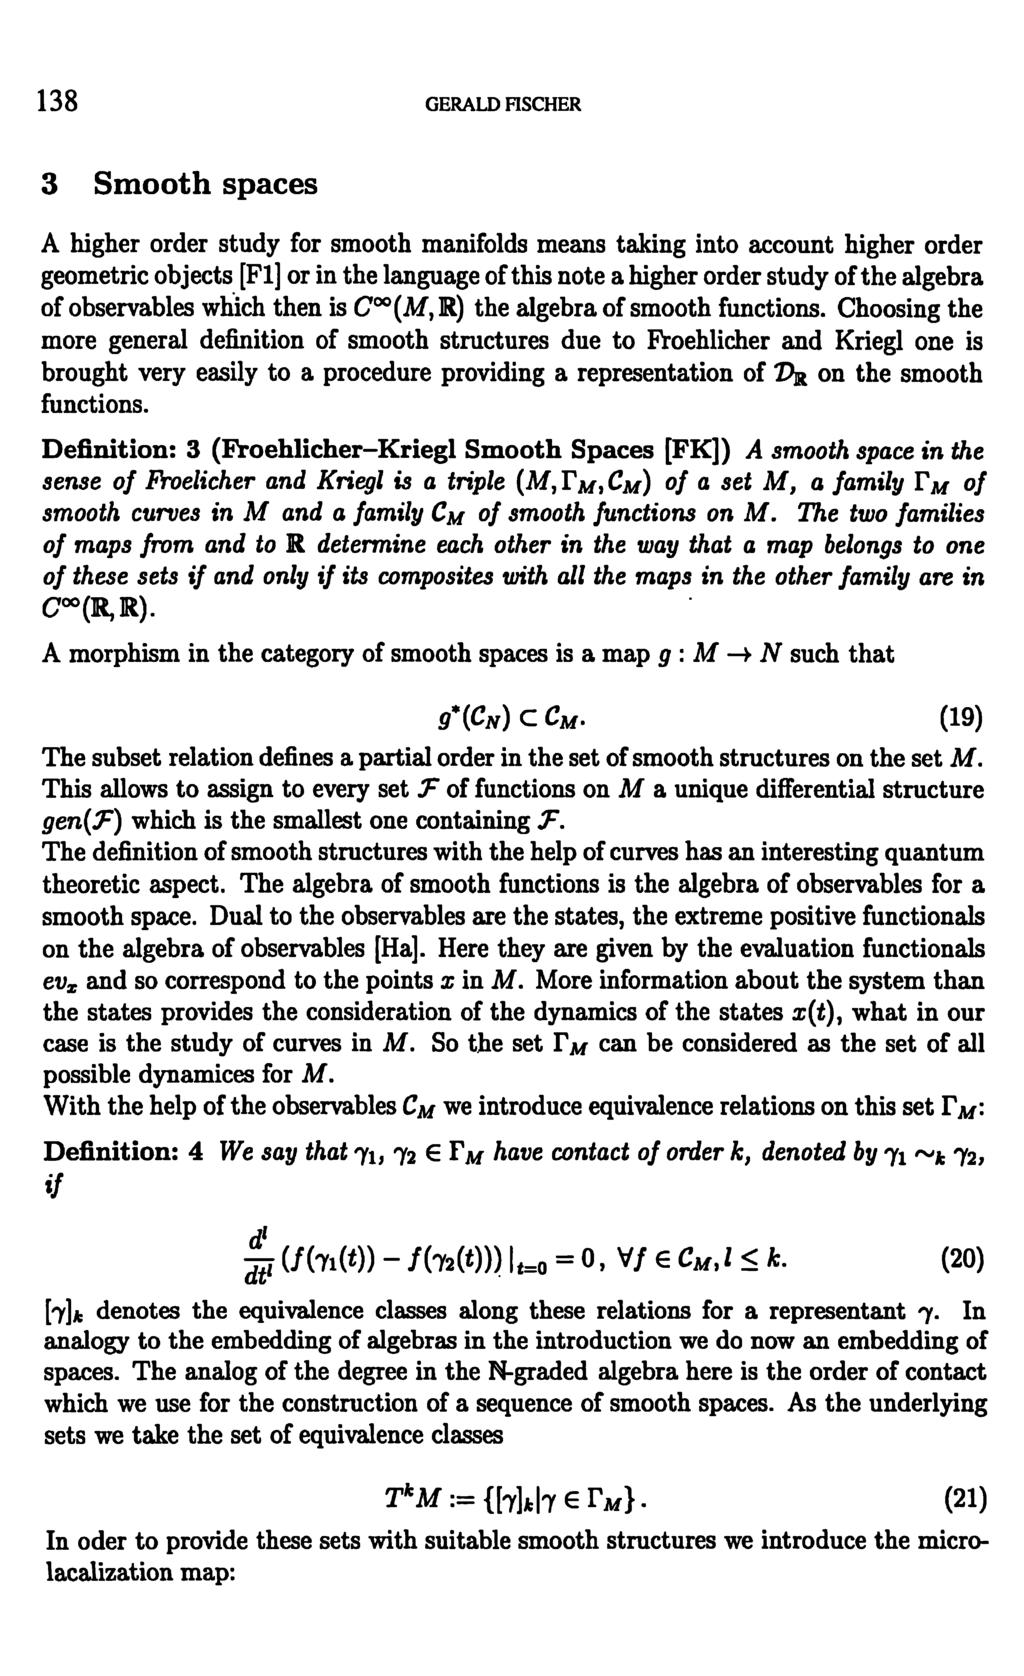 138 GERALD FISCHER 3 Smooth spaces A higher order study for smooth manifolds means taking into account higher order geometric objects [Fl] or in the language of this note a higher order study of the